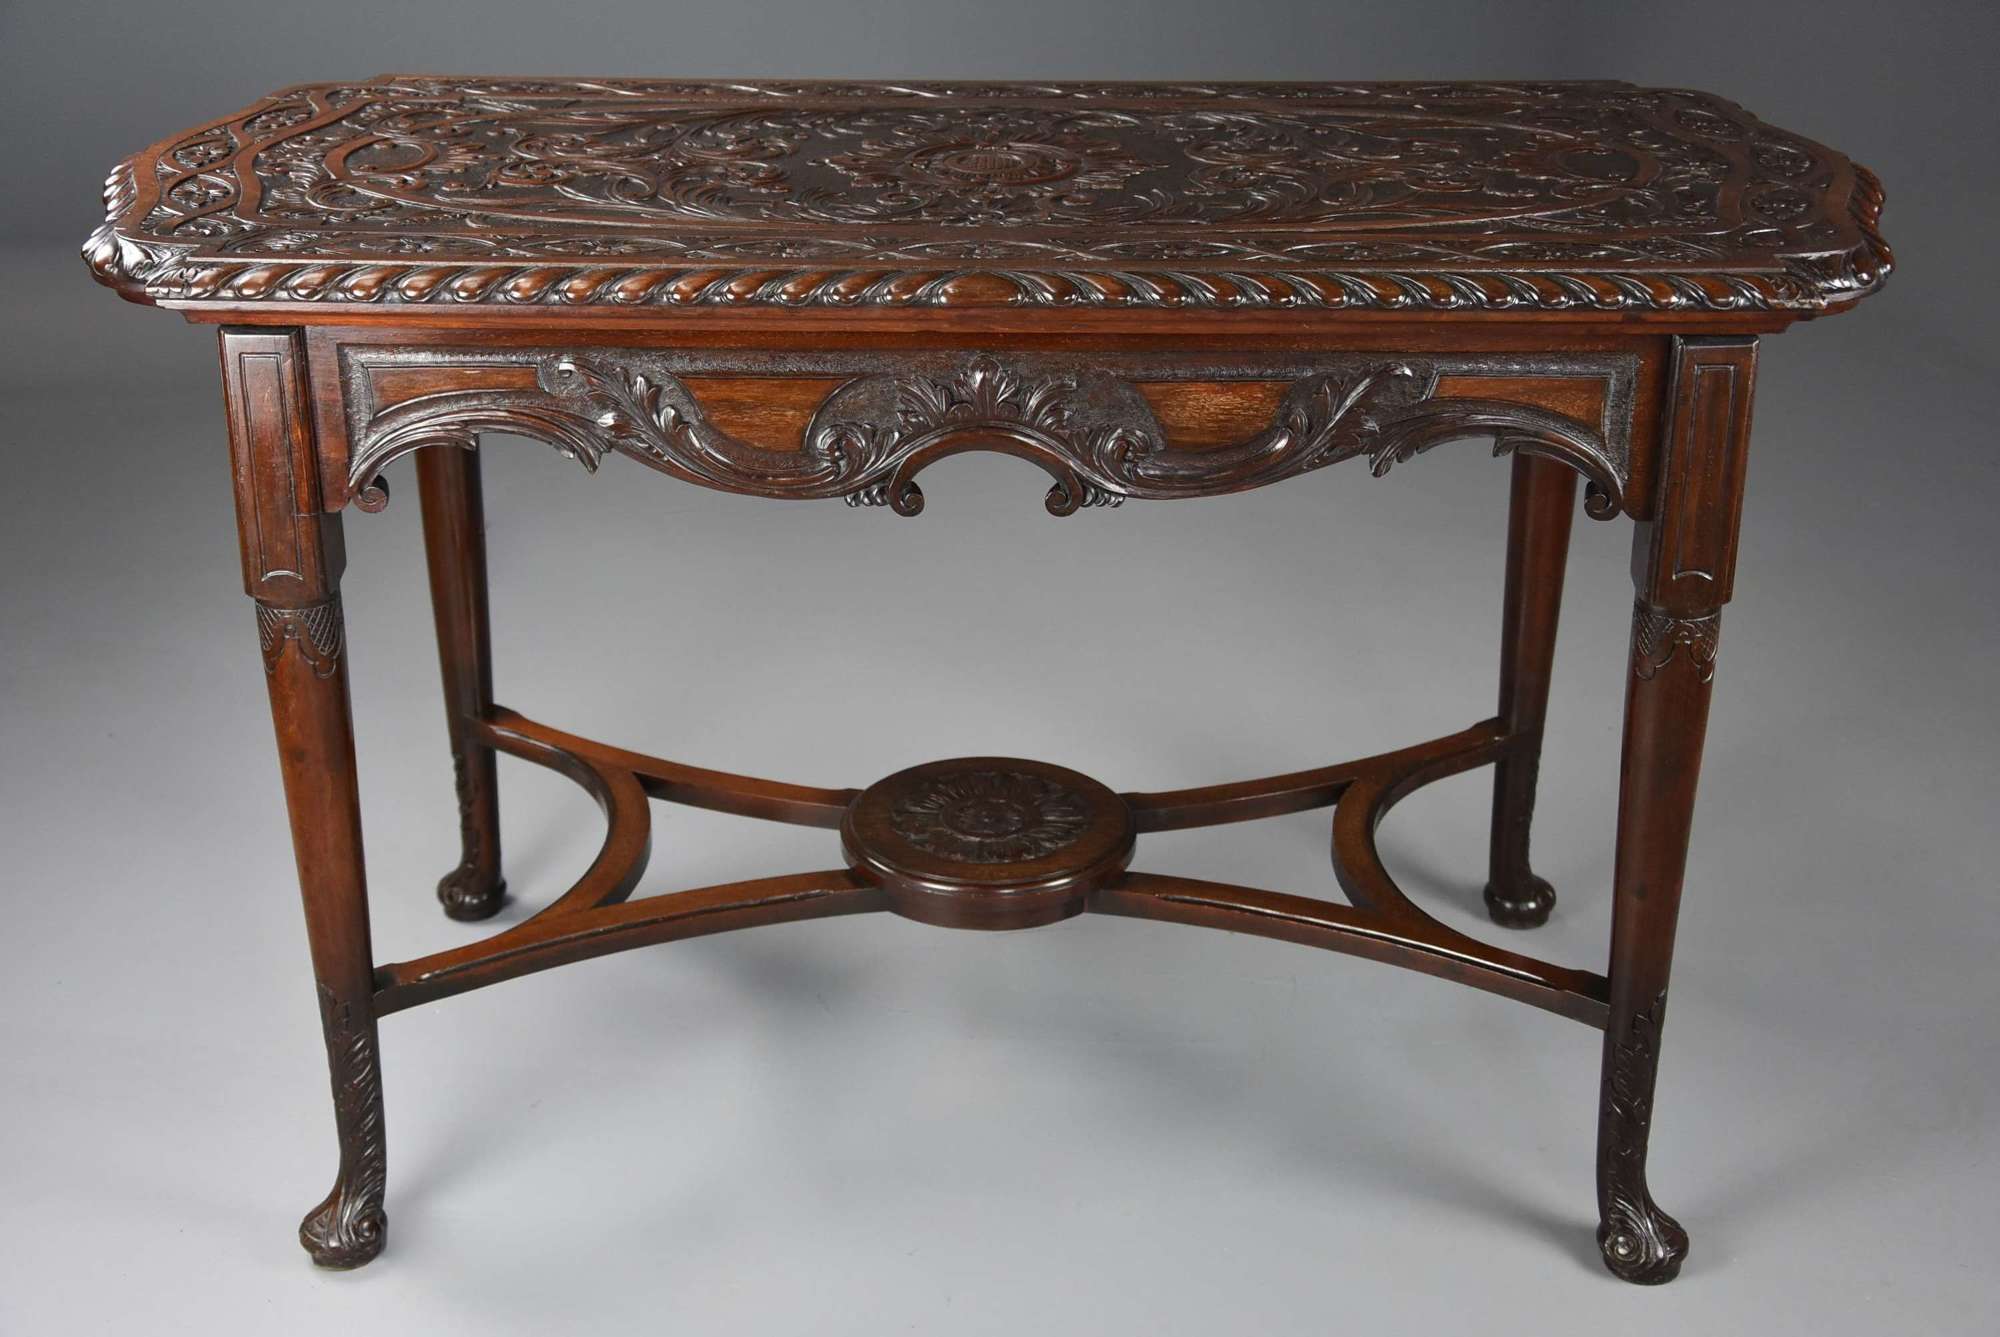 18th/19thc finely carved mahogany centre table